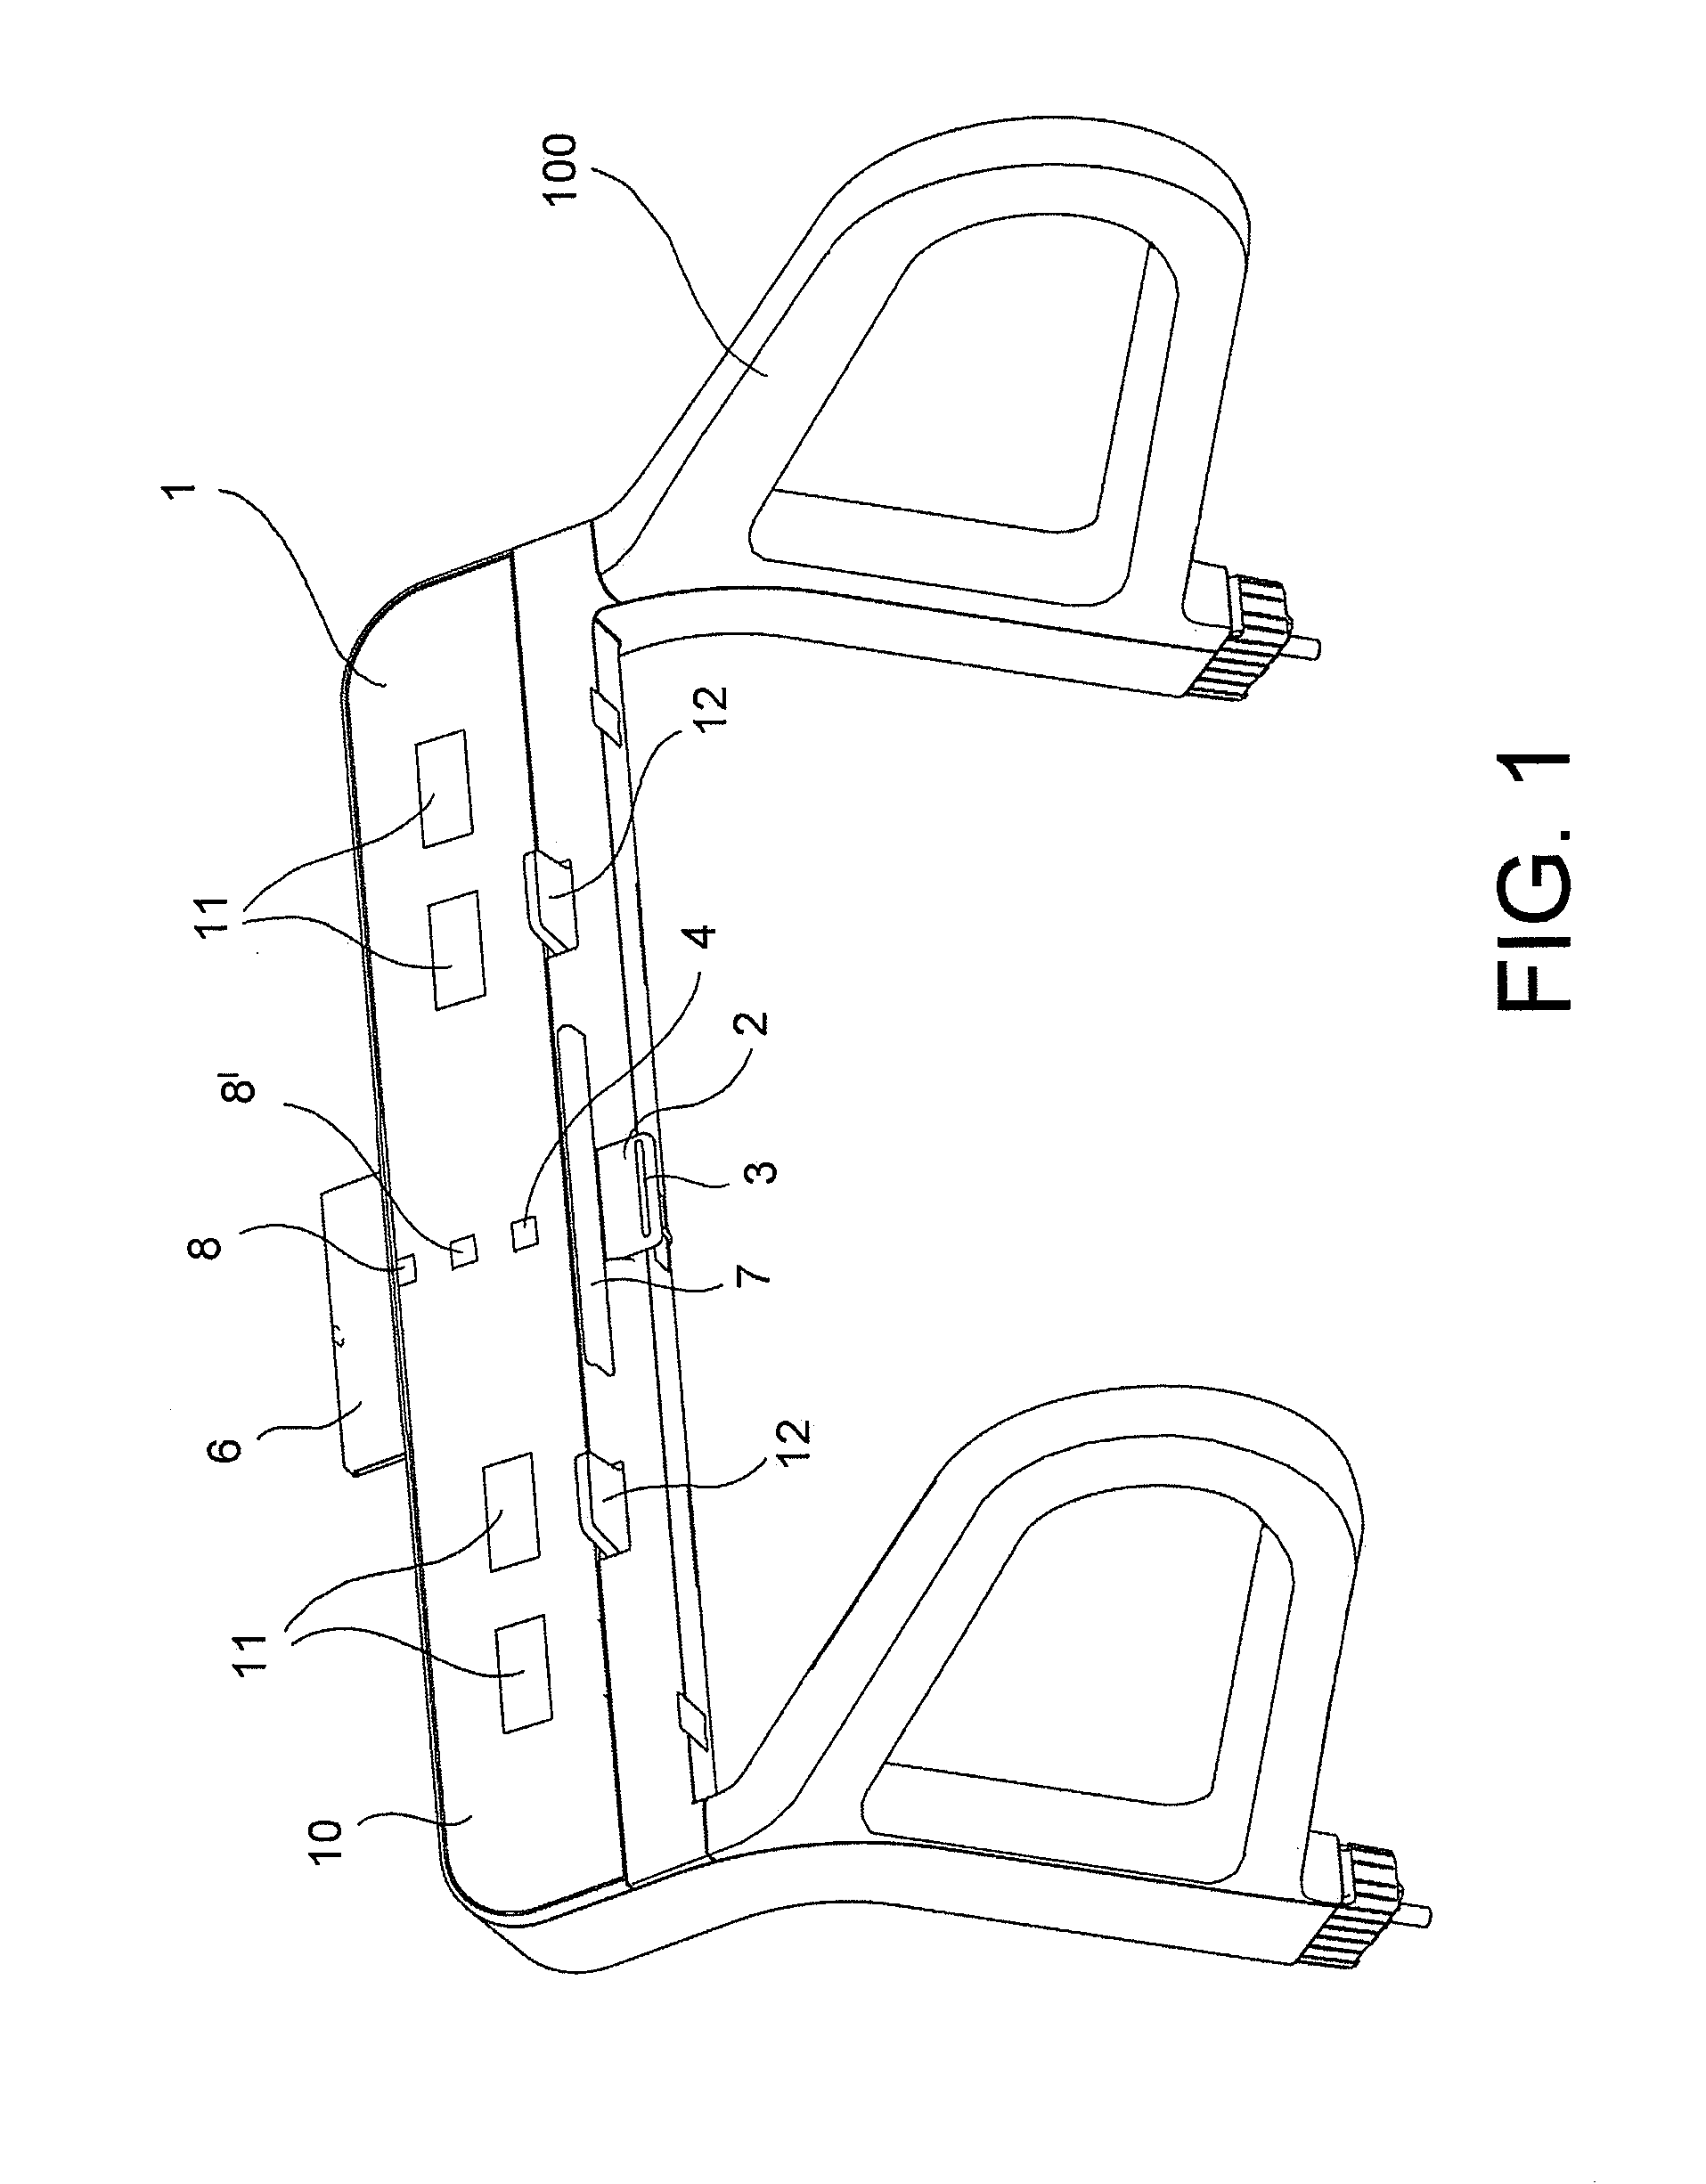 Control interface of an exercising machine suitable to assume operating modes